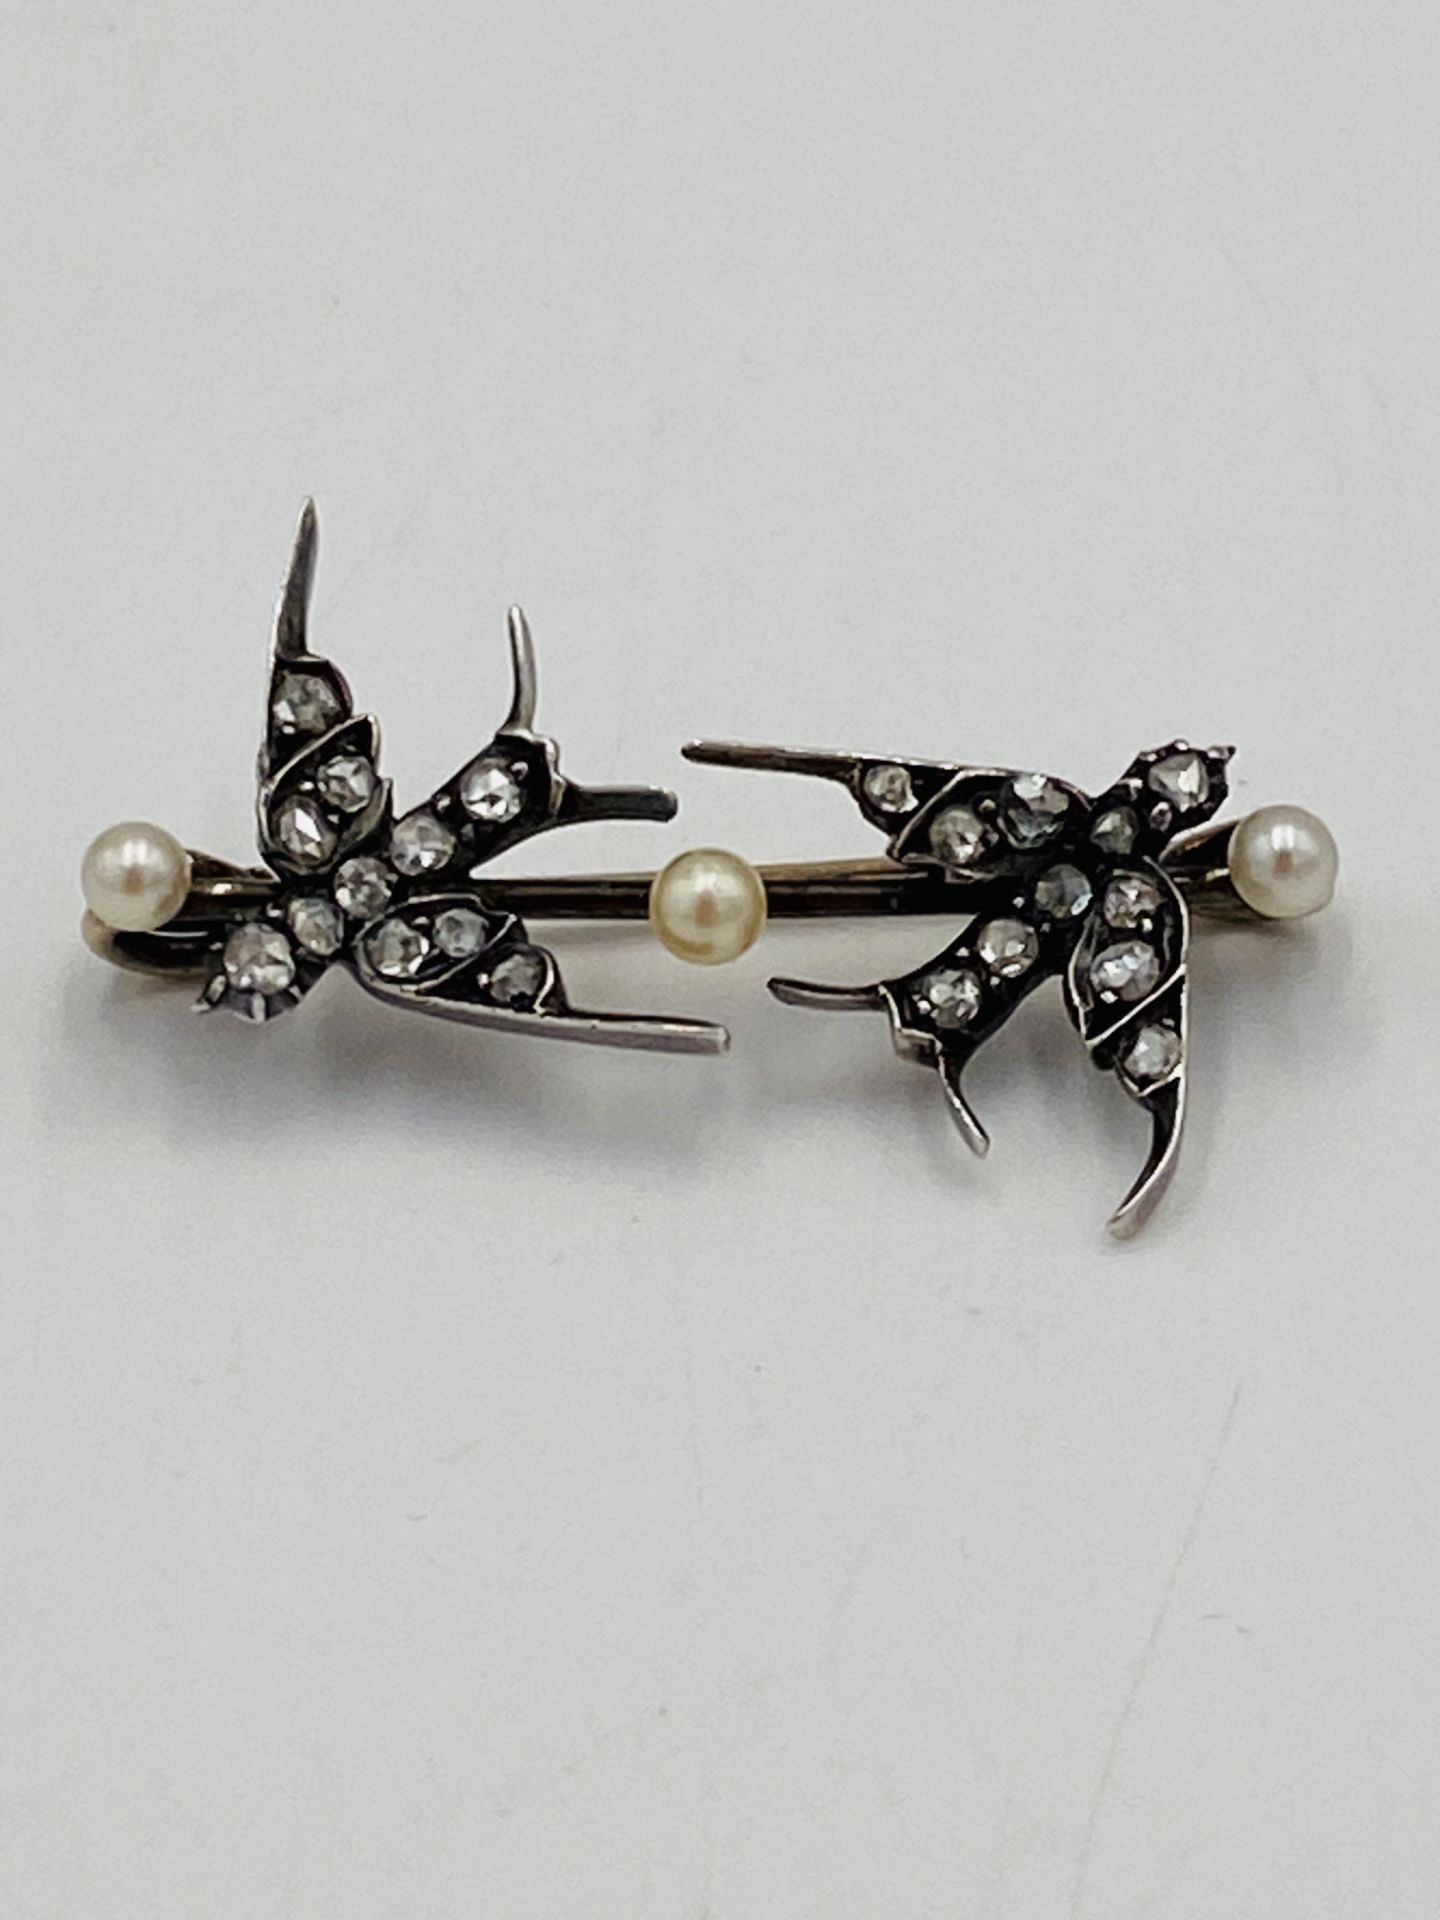 Diamond and pearl set brooch styled as a bird - Image 2 of 5